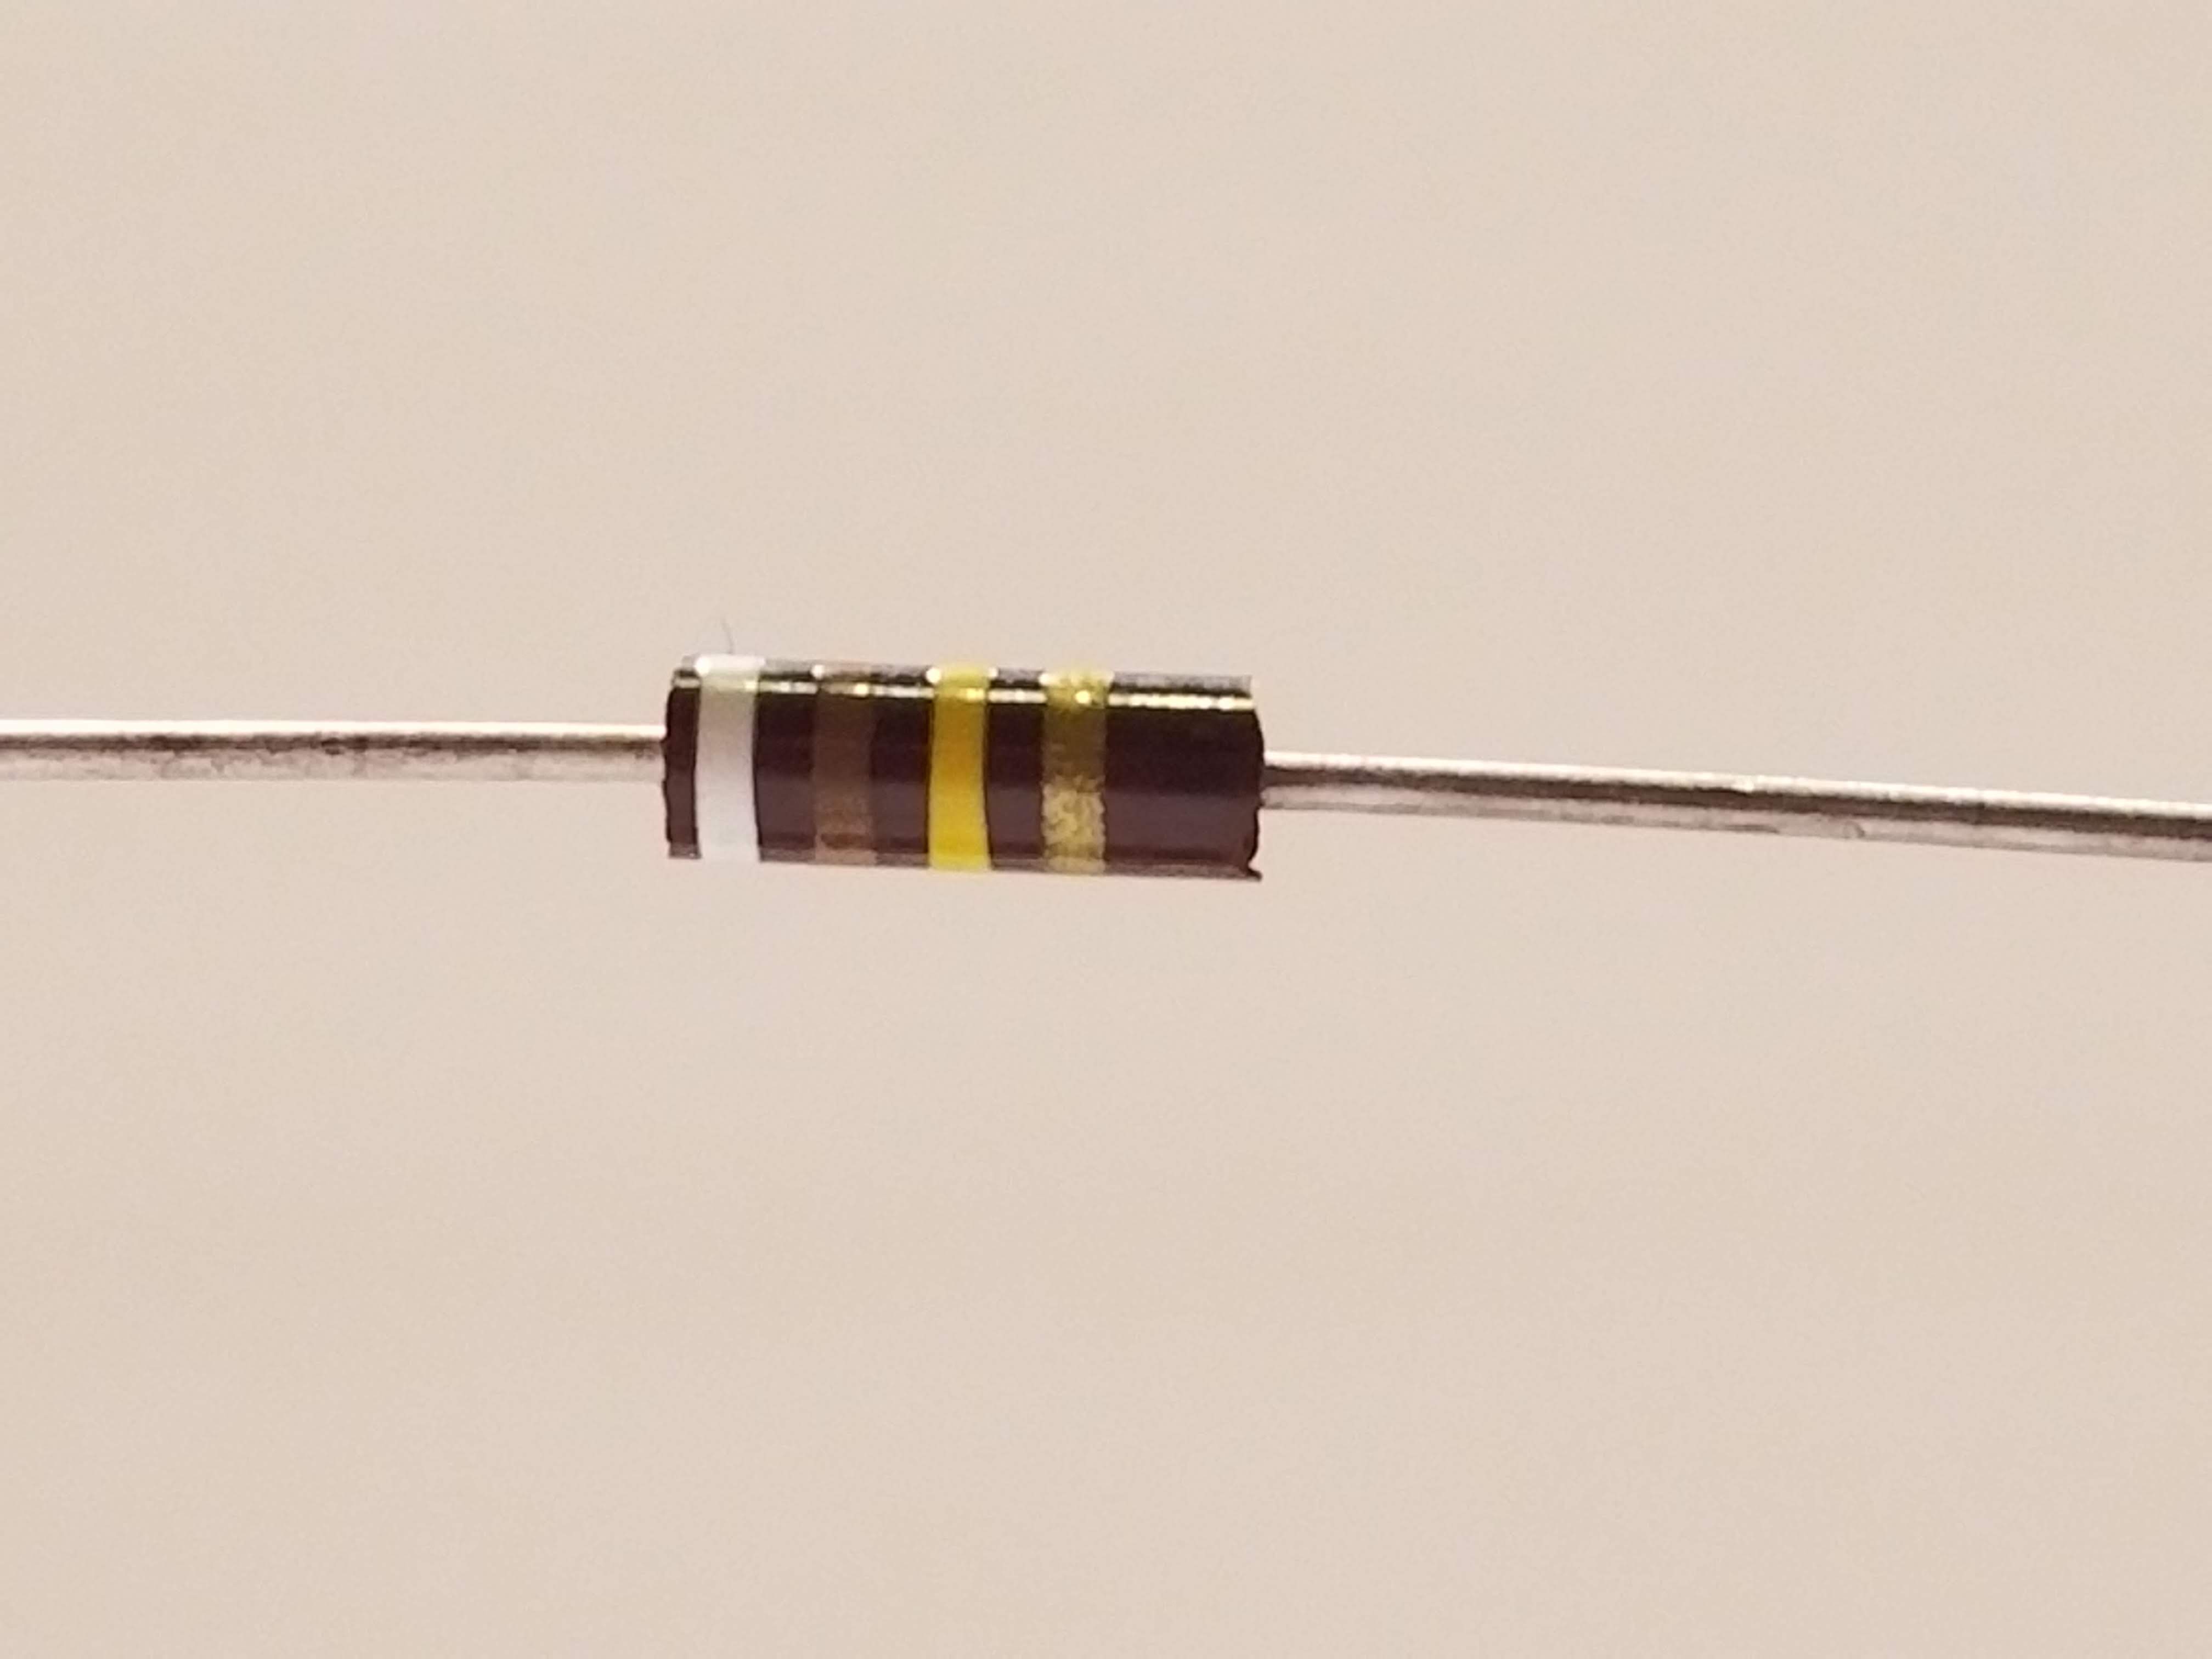 Picture of 910k Ohm Resistor